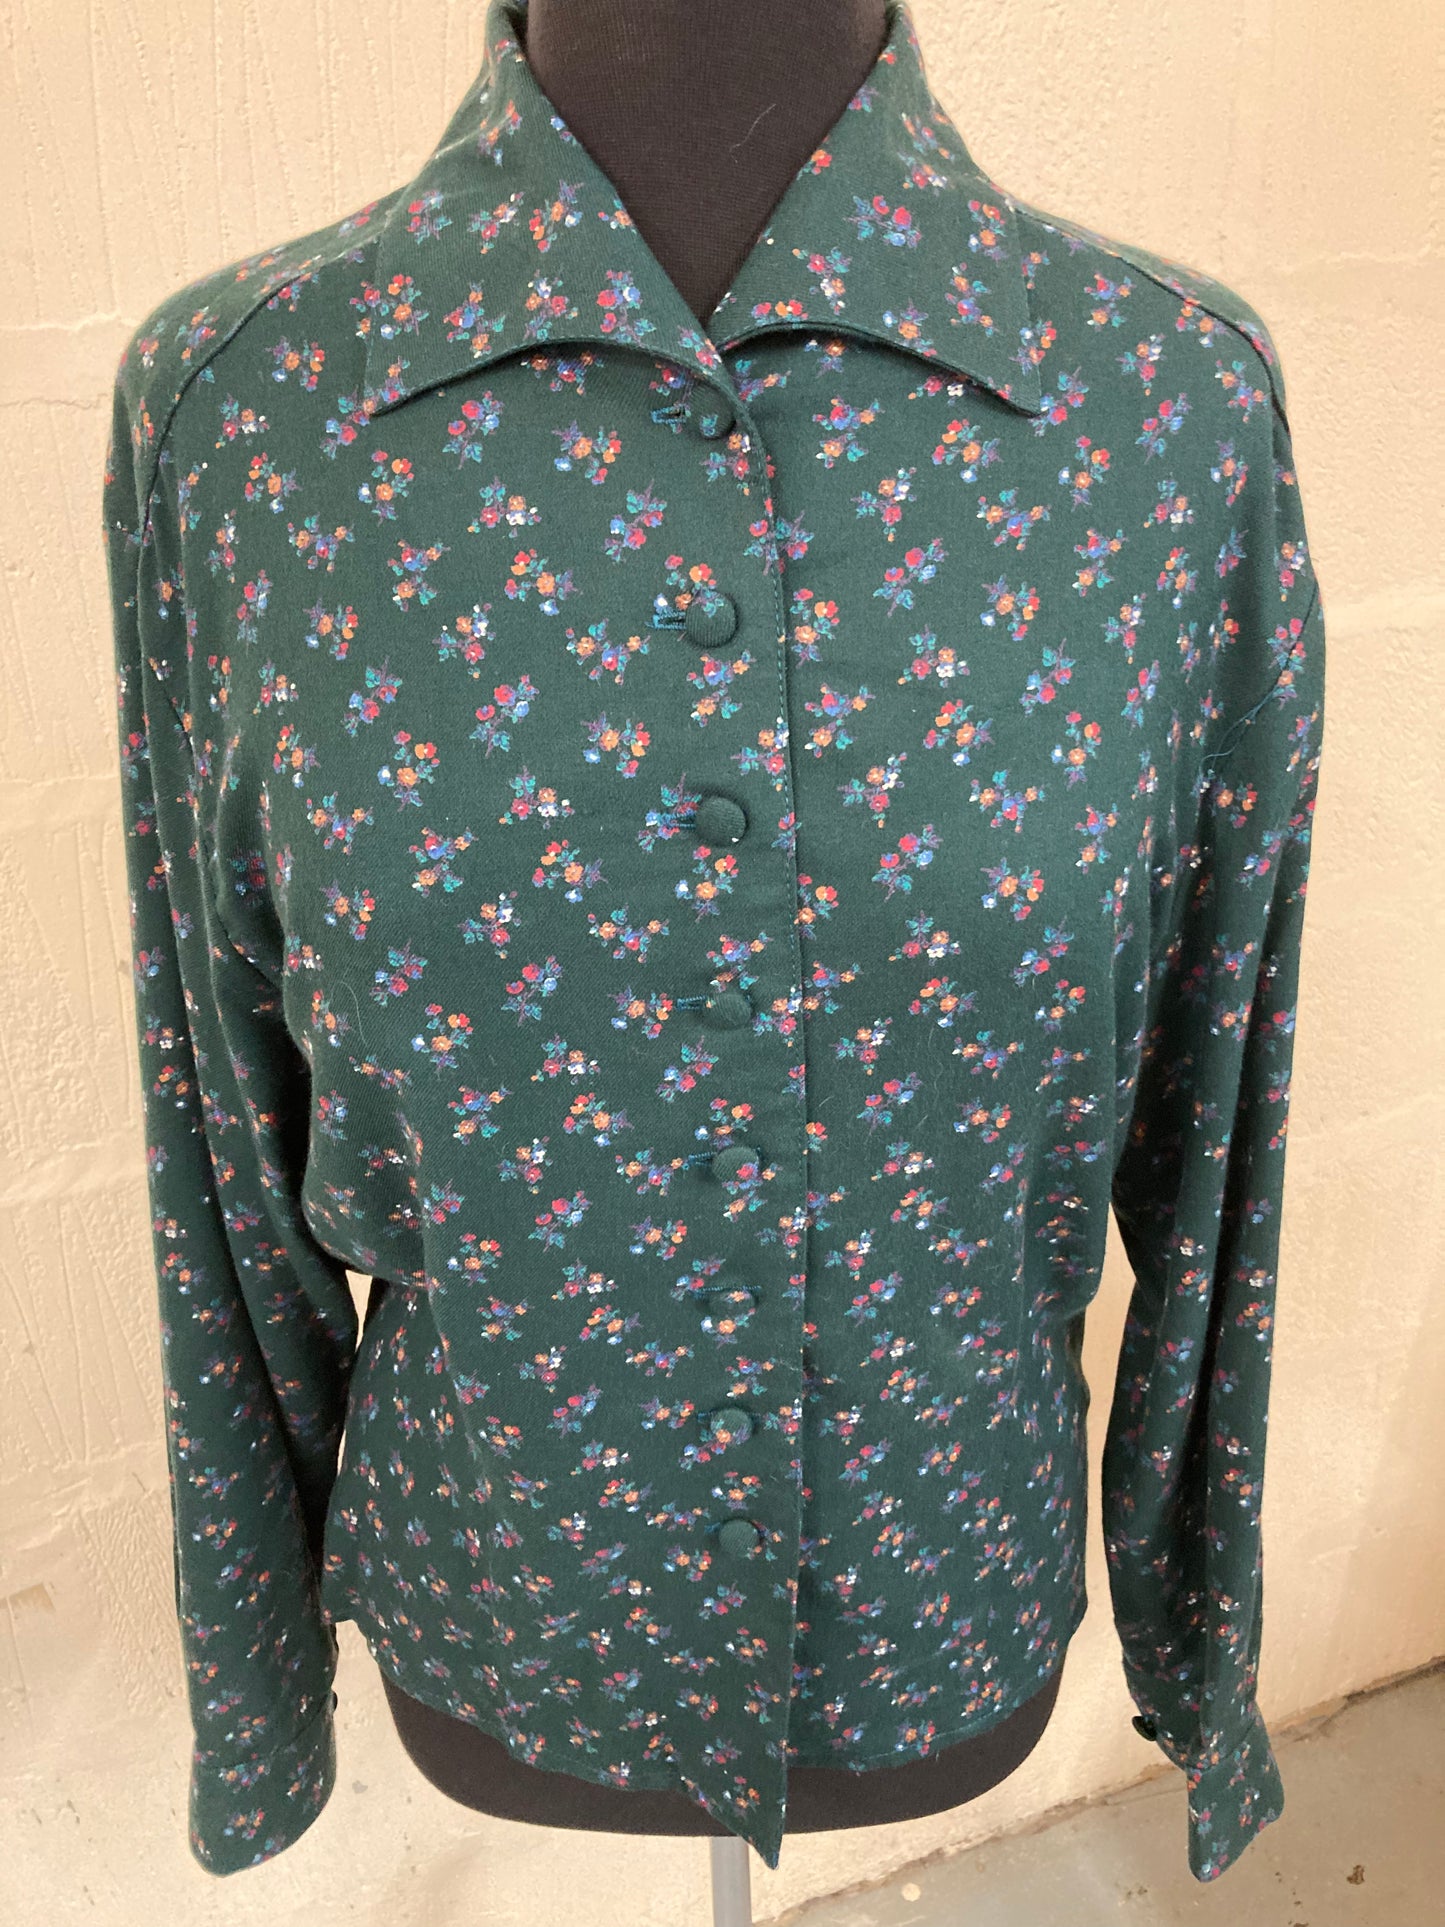 1980s Green with Floral Pattern Wool Blouse Size 14